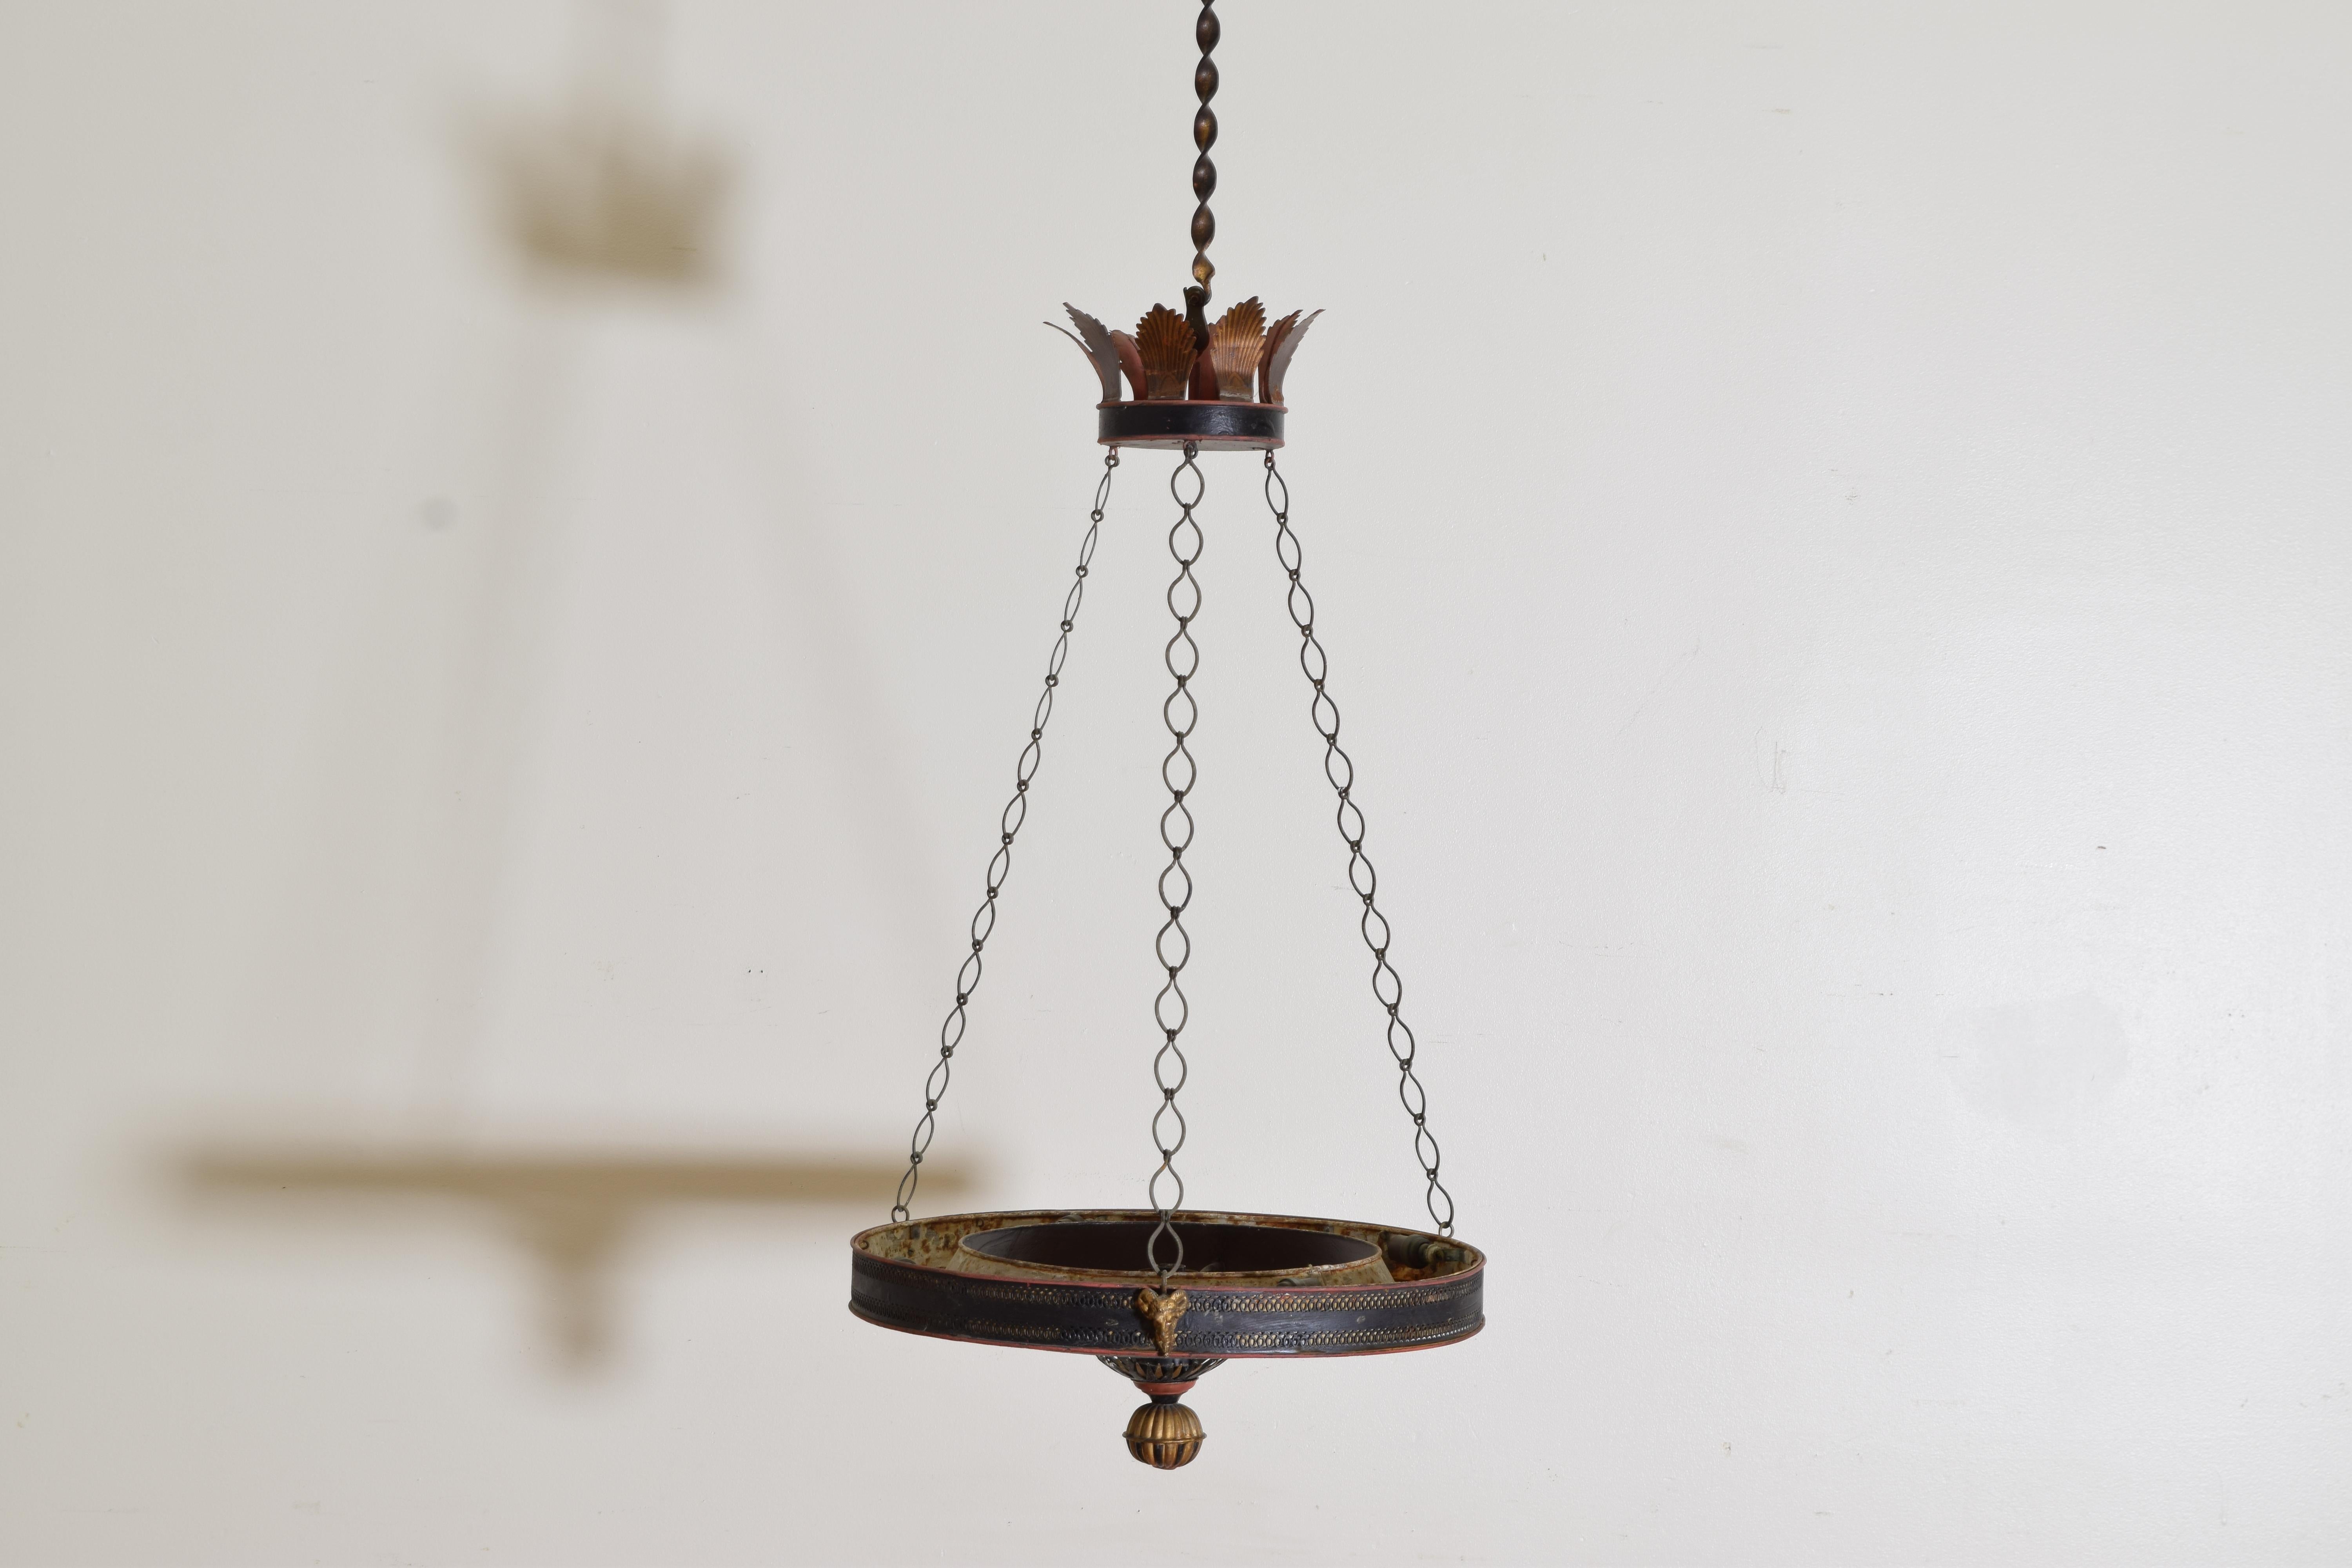 Completely original with a canopy of palm fronds issuing three lengths of hand forged chain supporting a large perforated ring with a stretcher that originally held lamp oil, now wired with a central candle light and hidden up lights inside the